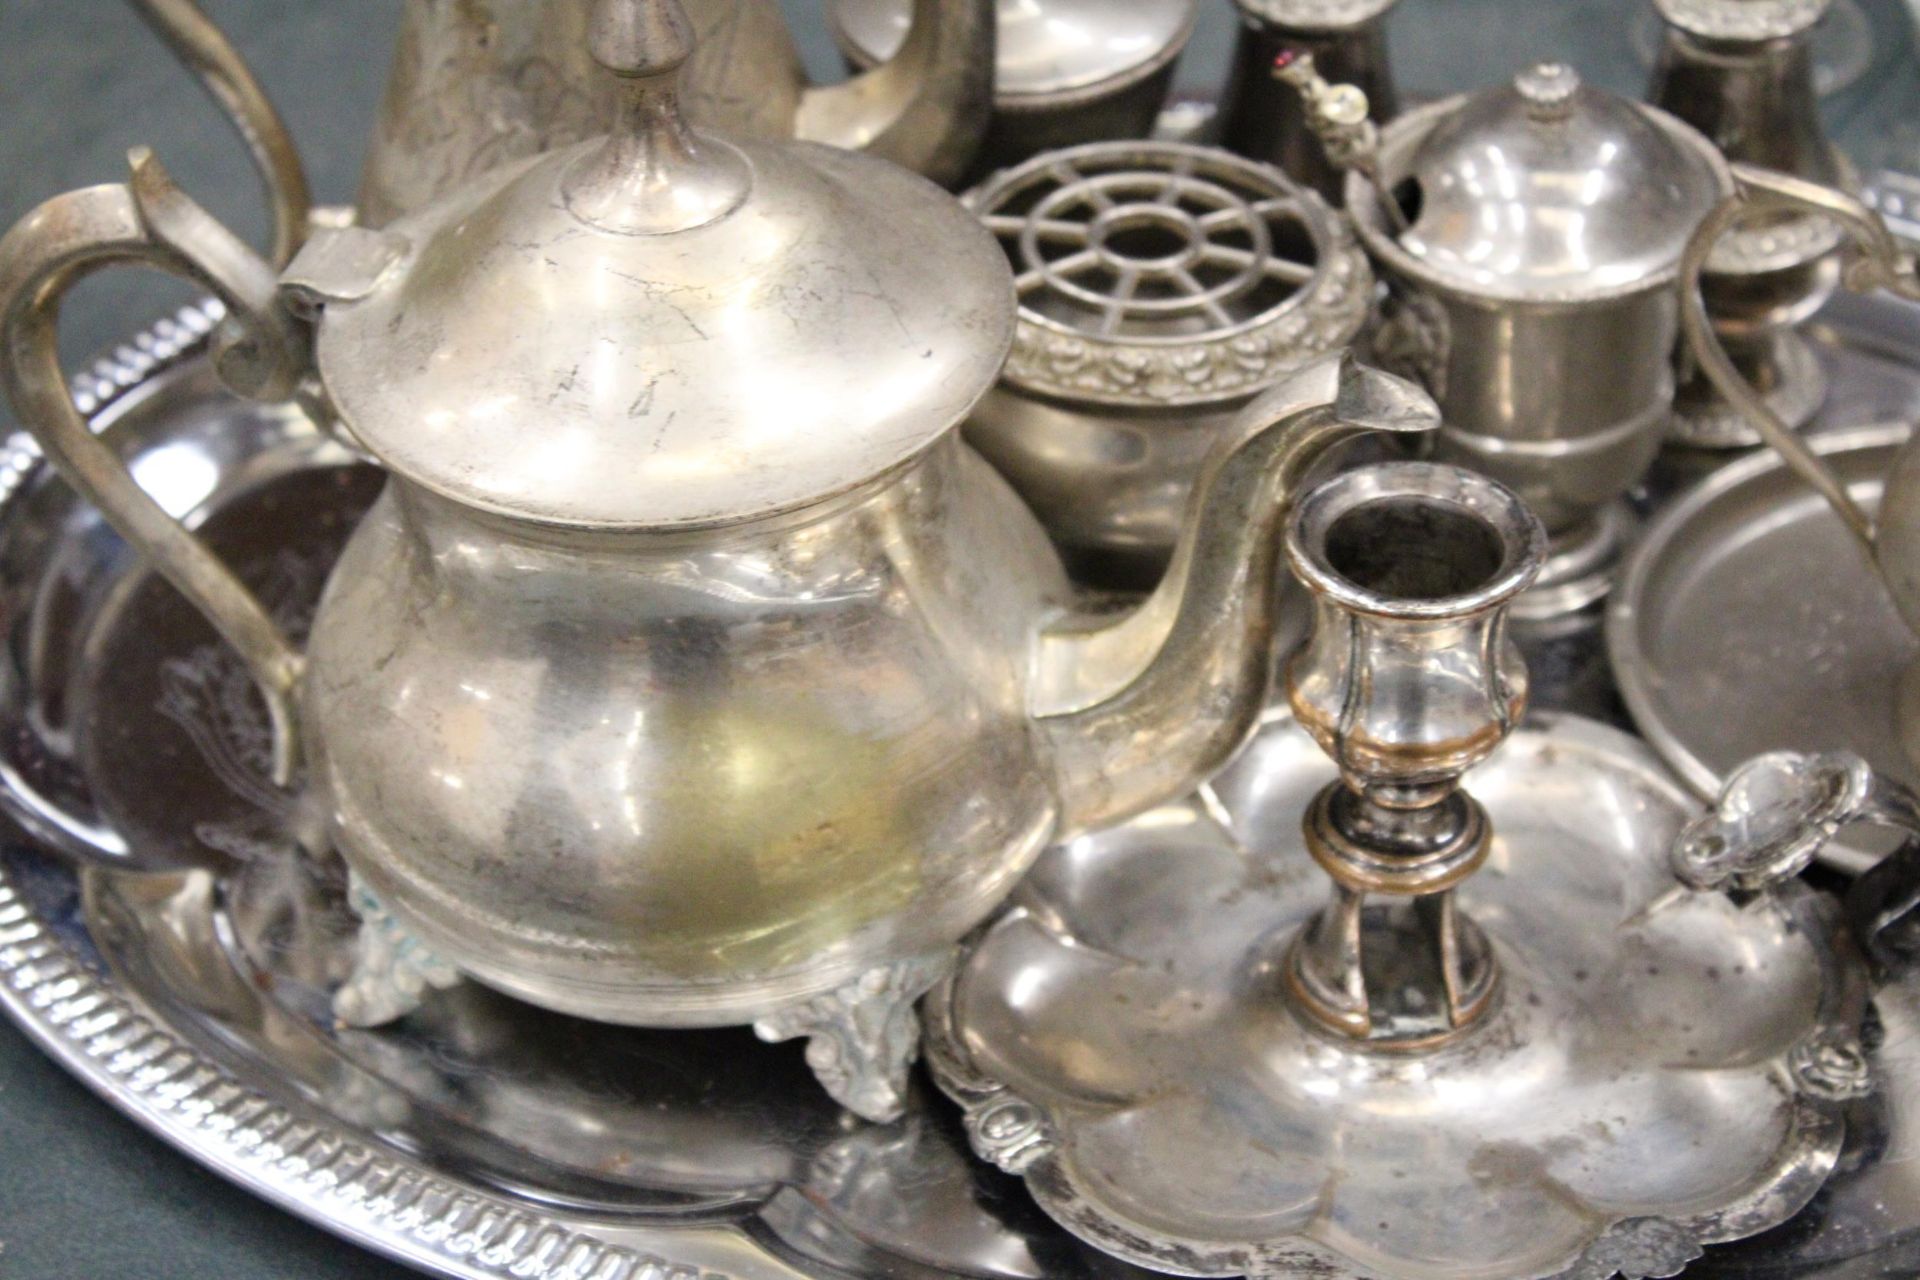 A QUANTITY OF SILVER PLATED ITEMS TO INCLUDE, A TRAY, TEAPOT, COFFEE POT, CANDLESTICK, JUGS, A CRUET - Image 2 of 6